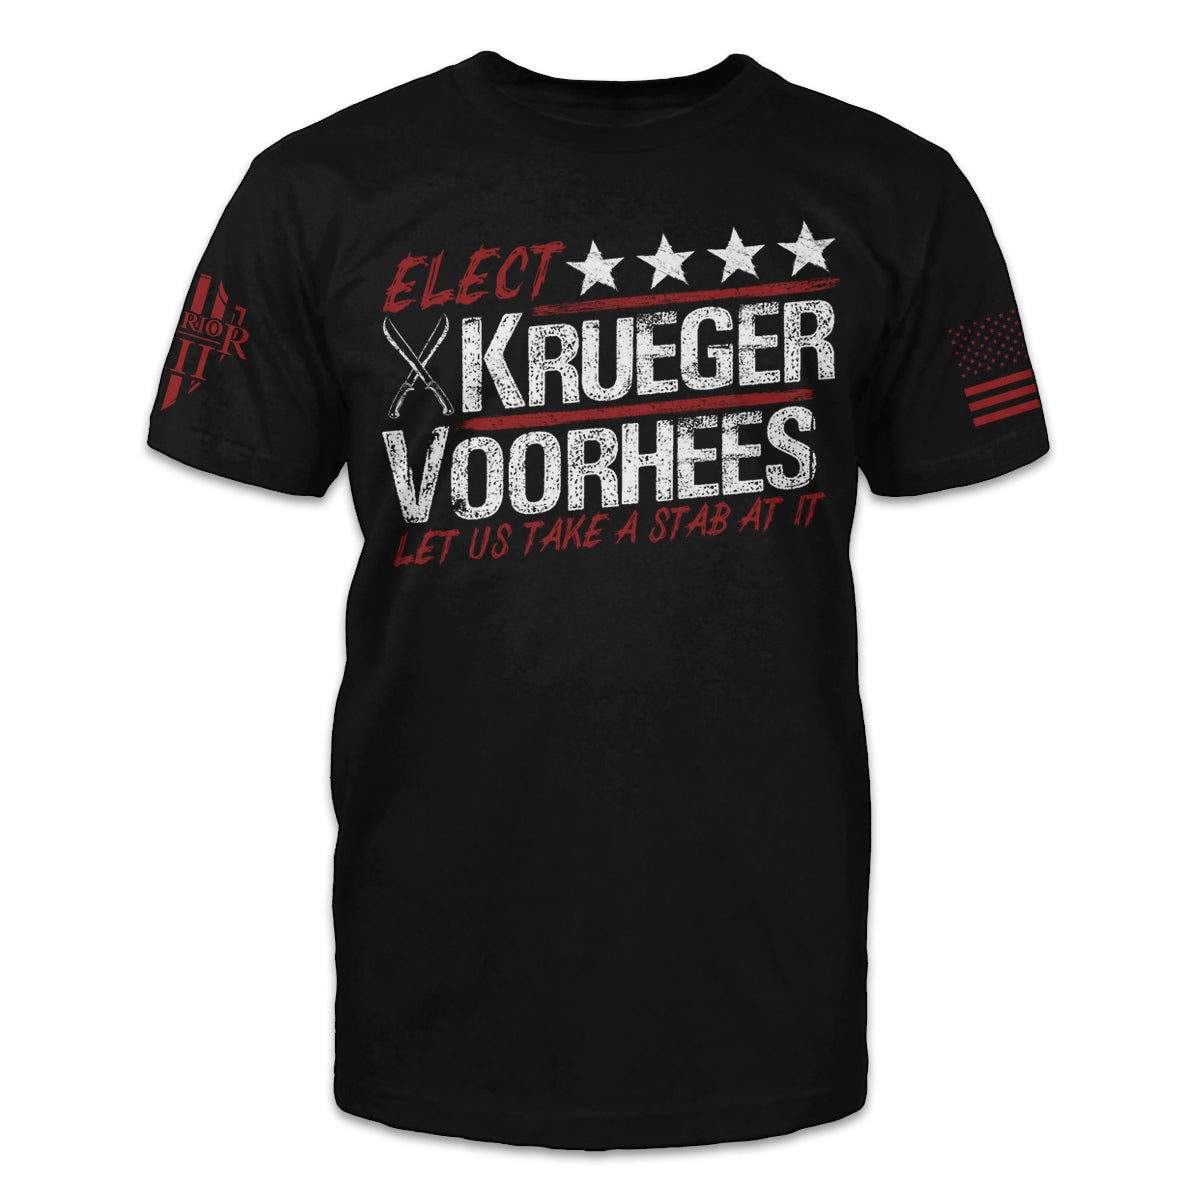 A black t-shirt with the words "Elect Krueger - Voorhees: Let us take a stab at it" printed on the front.